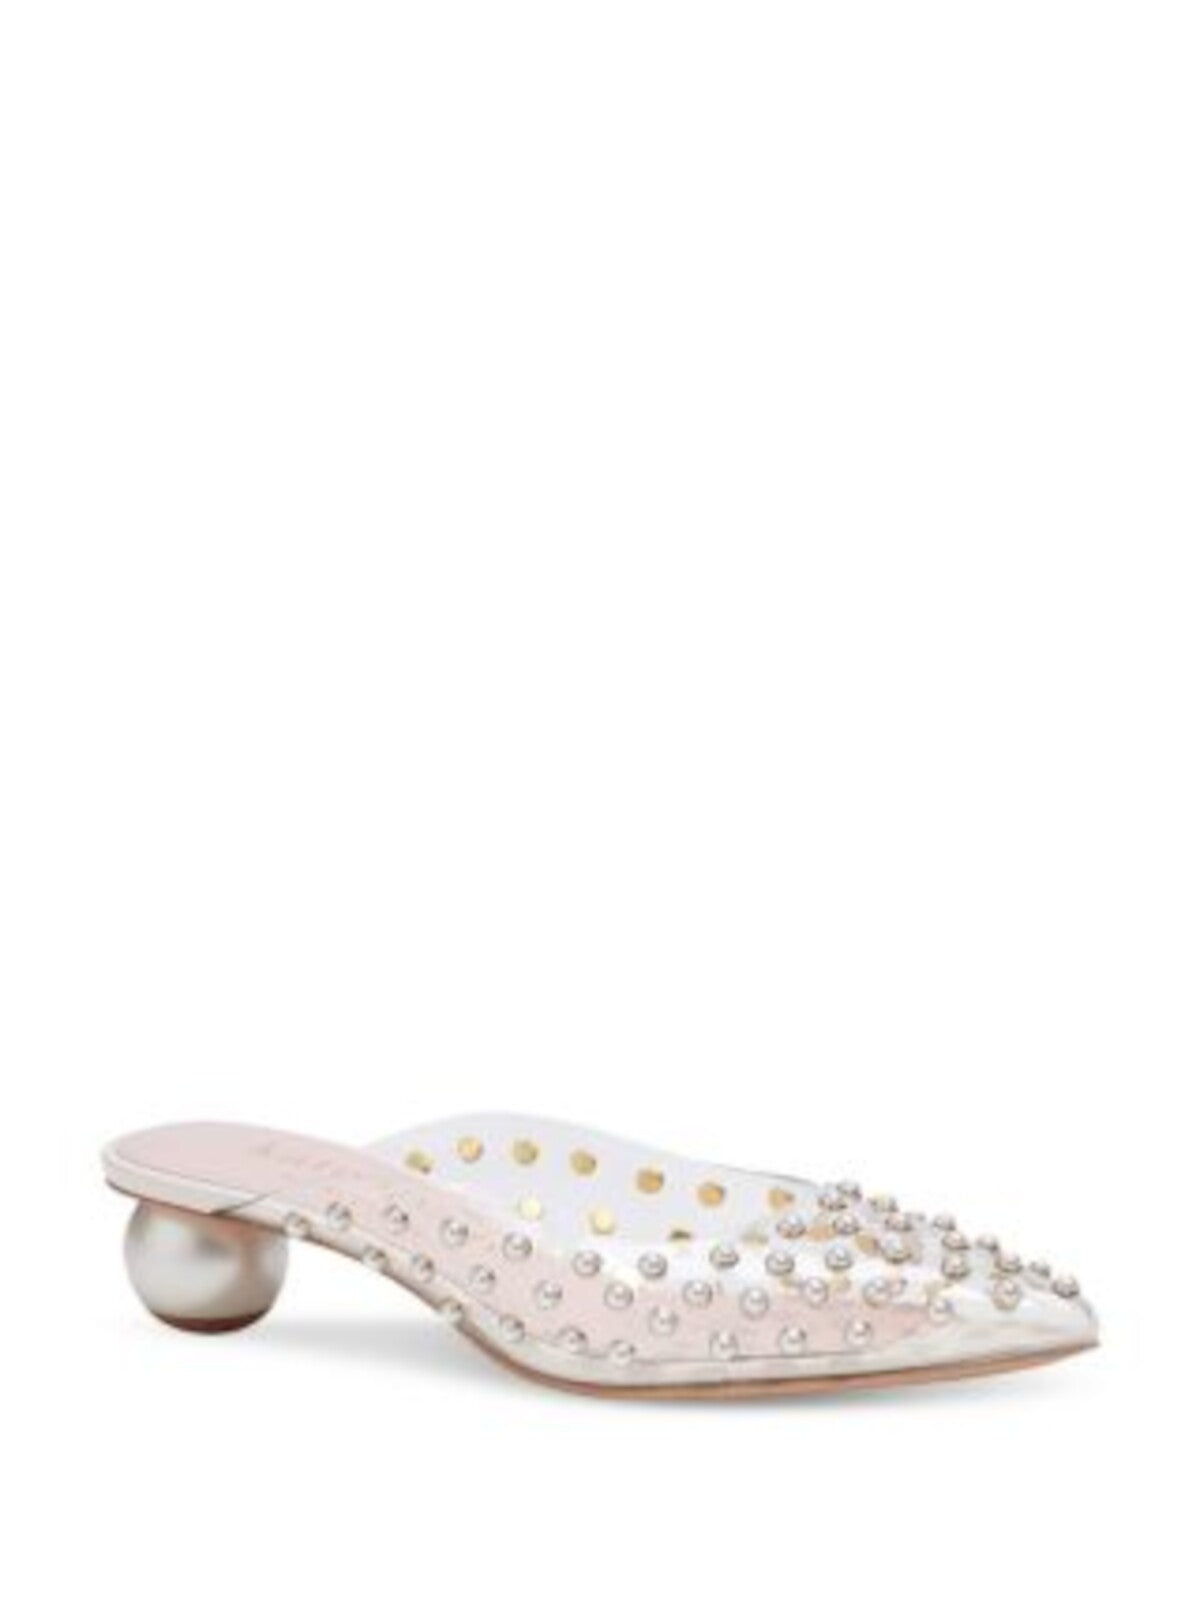 KATE SPADE NEW YORK Womens Clear Embellished Padded Honor Pointed Toe Slip On Flats Shoes 10 B